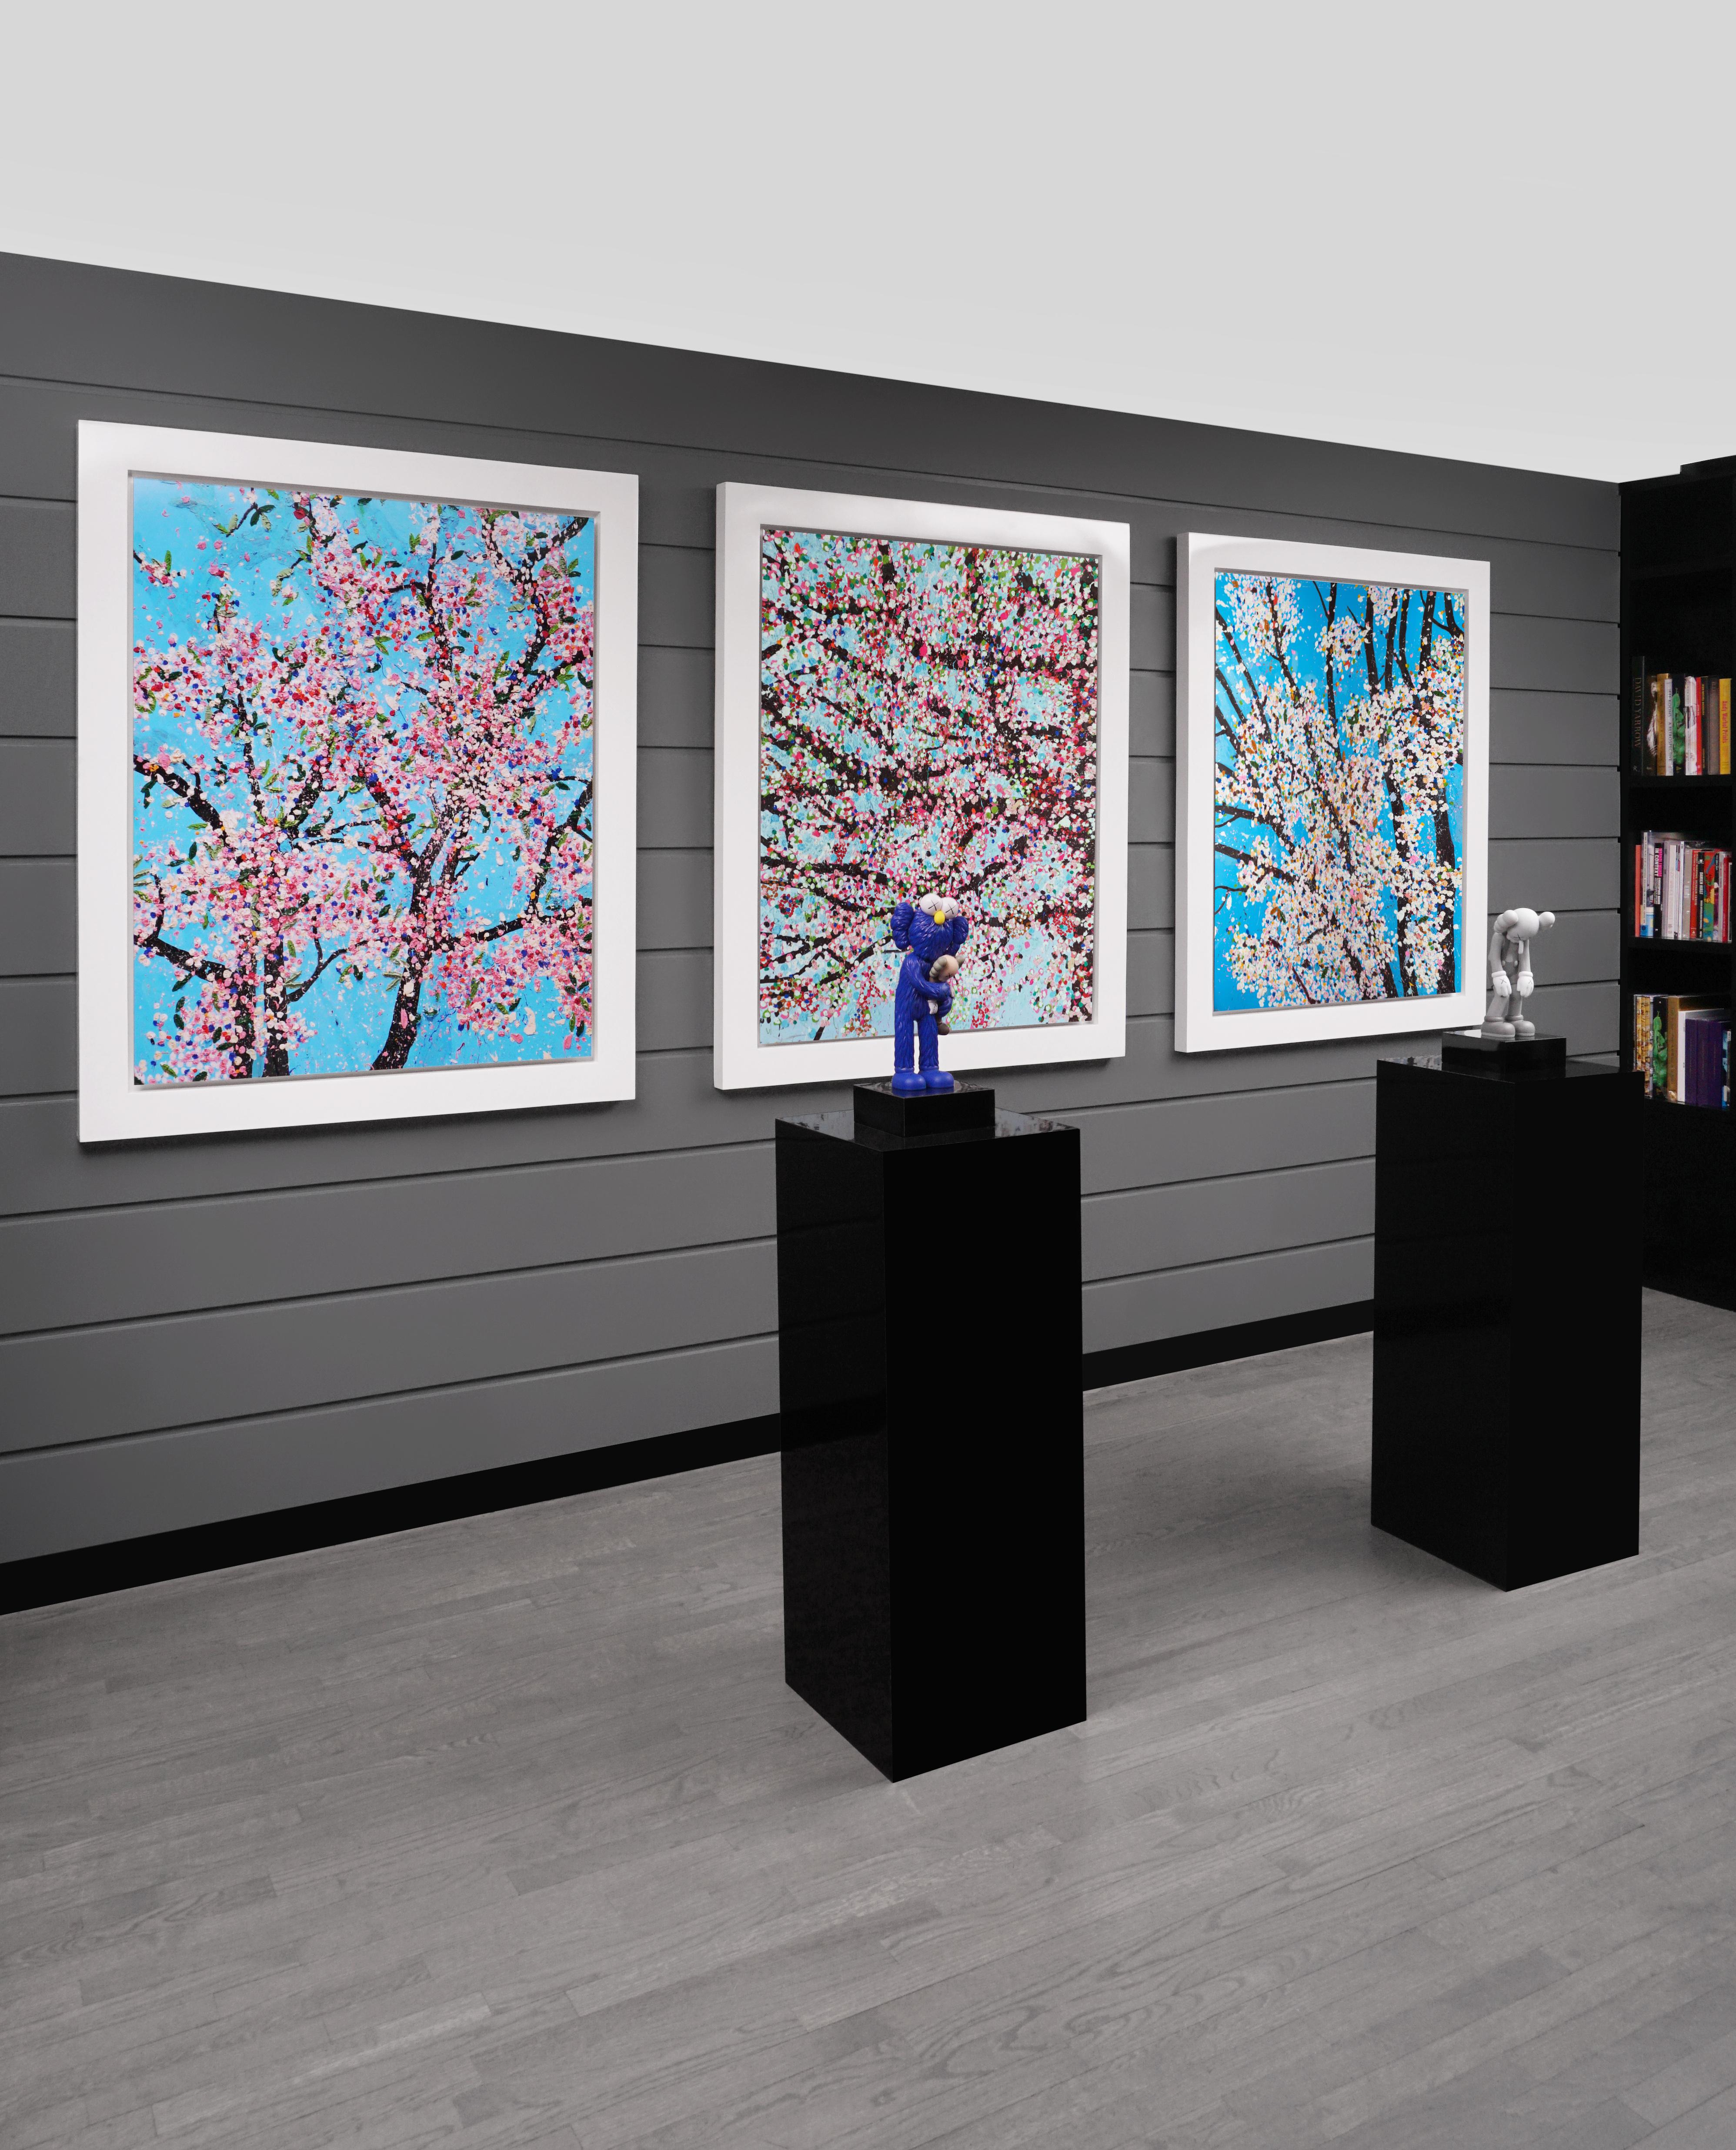 The contemporary pop art cherry blossom landscape ‘Loyalty' is one of the eight from the iconic ‘Virtues’ series by Damien Hirst, the laminated giclée print on aluminum panel was created in 2021 as a reflection of his latest exploration as a master